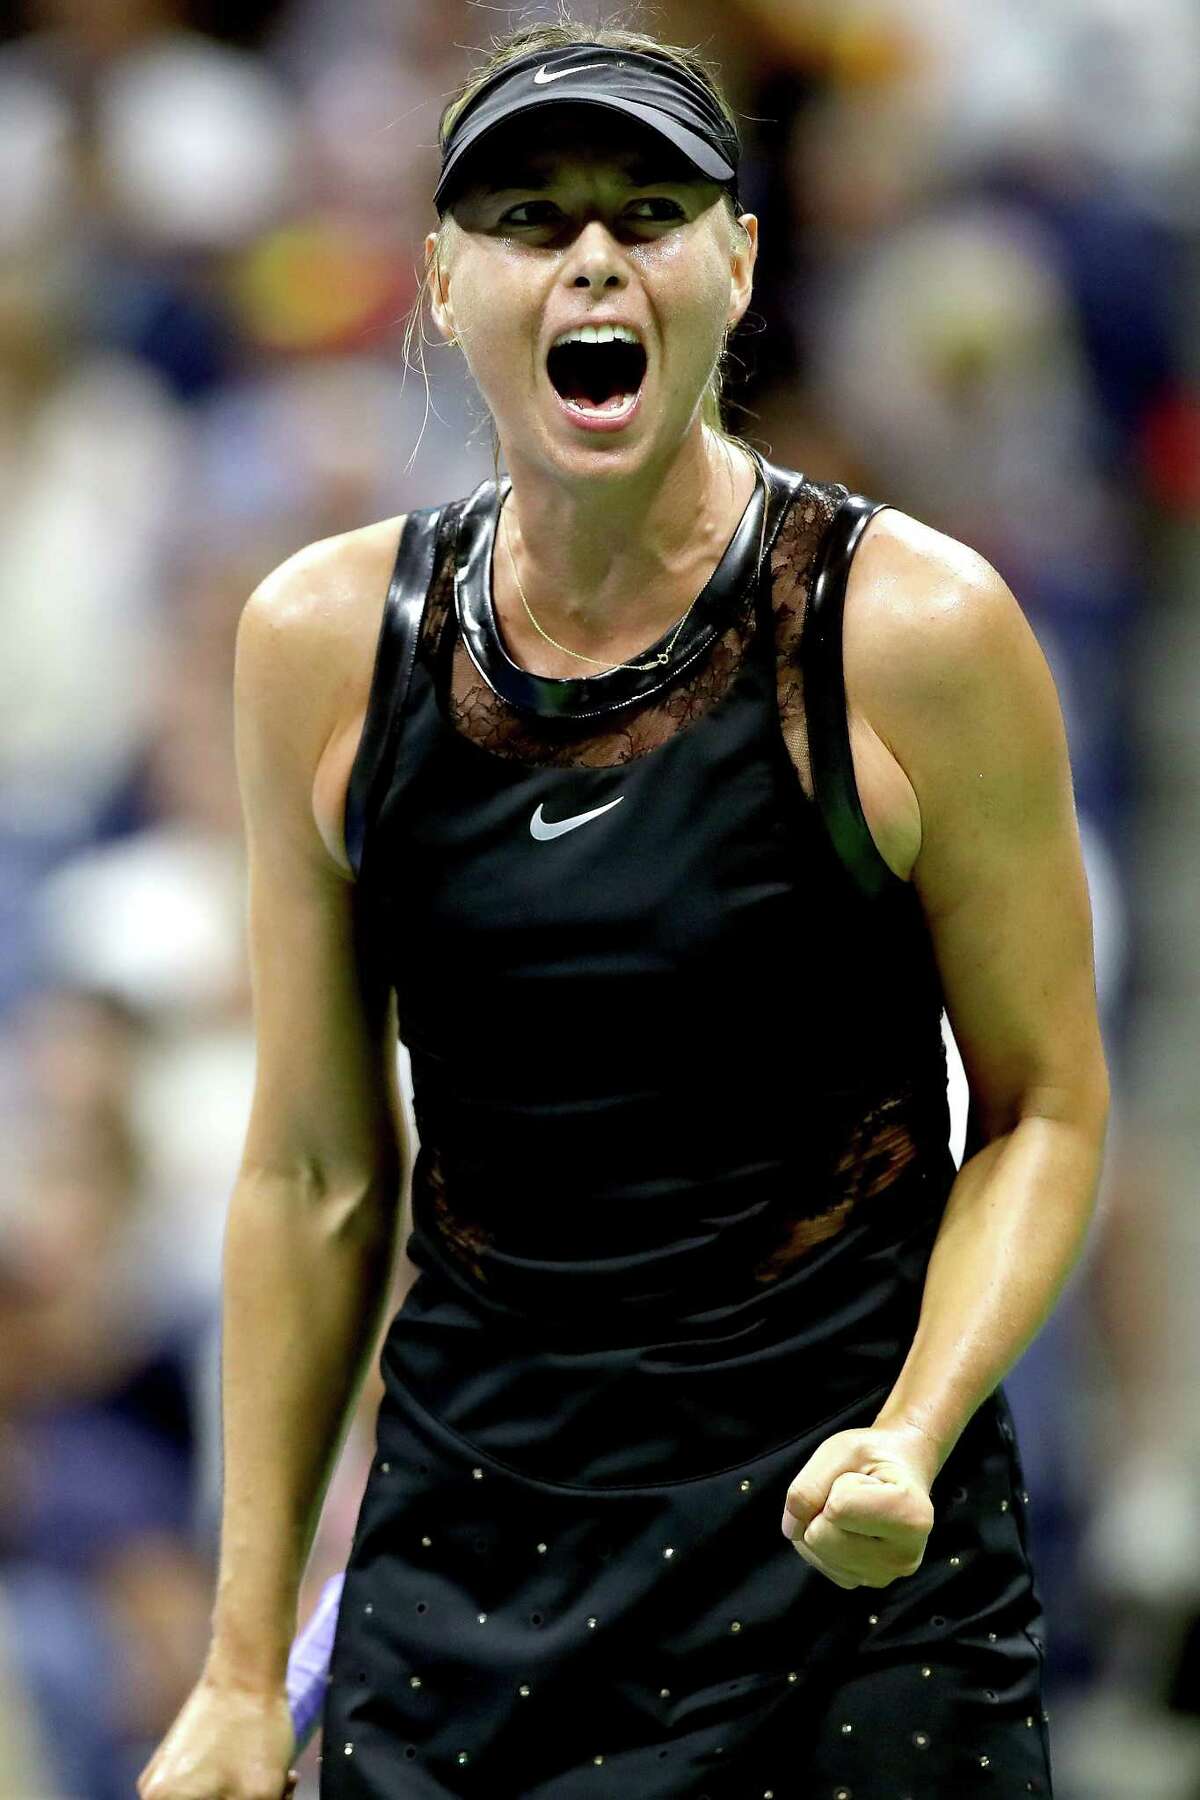 NEW YORK, NY - AUGUST 28: Maria Sharapova of Russia reacts during her first round Women's Singles match against Simona Halep of Romania on Day One of the 2017 US Open at the USTA Billie Jean King National Tennis Center on August 28, 2017 in the Flushing neighborhood of the Queens borough of New York City. (Photo by Matthew Stockman/Getty Images) ORG XMIT: 700042999